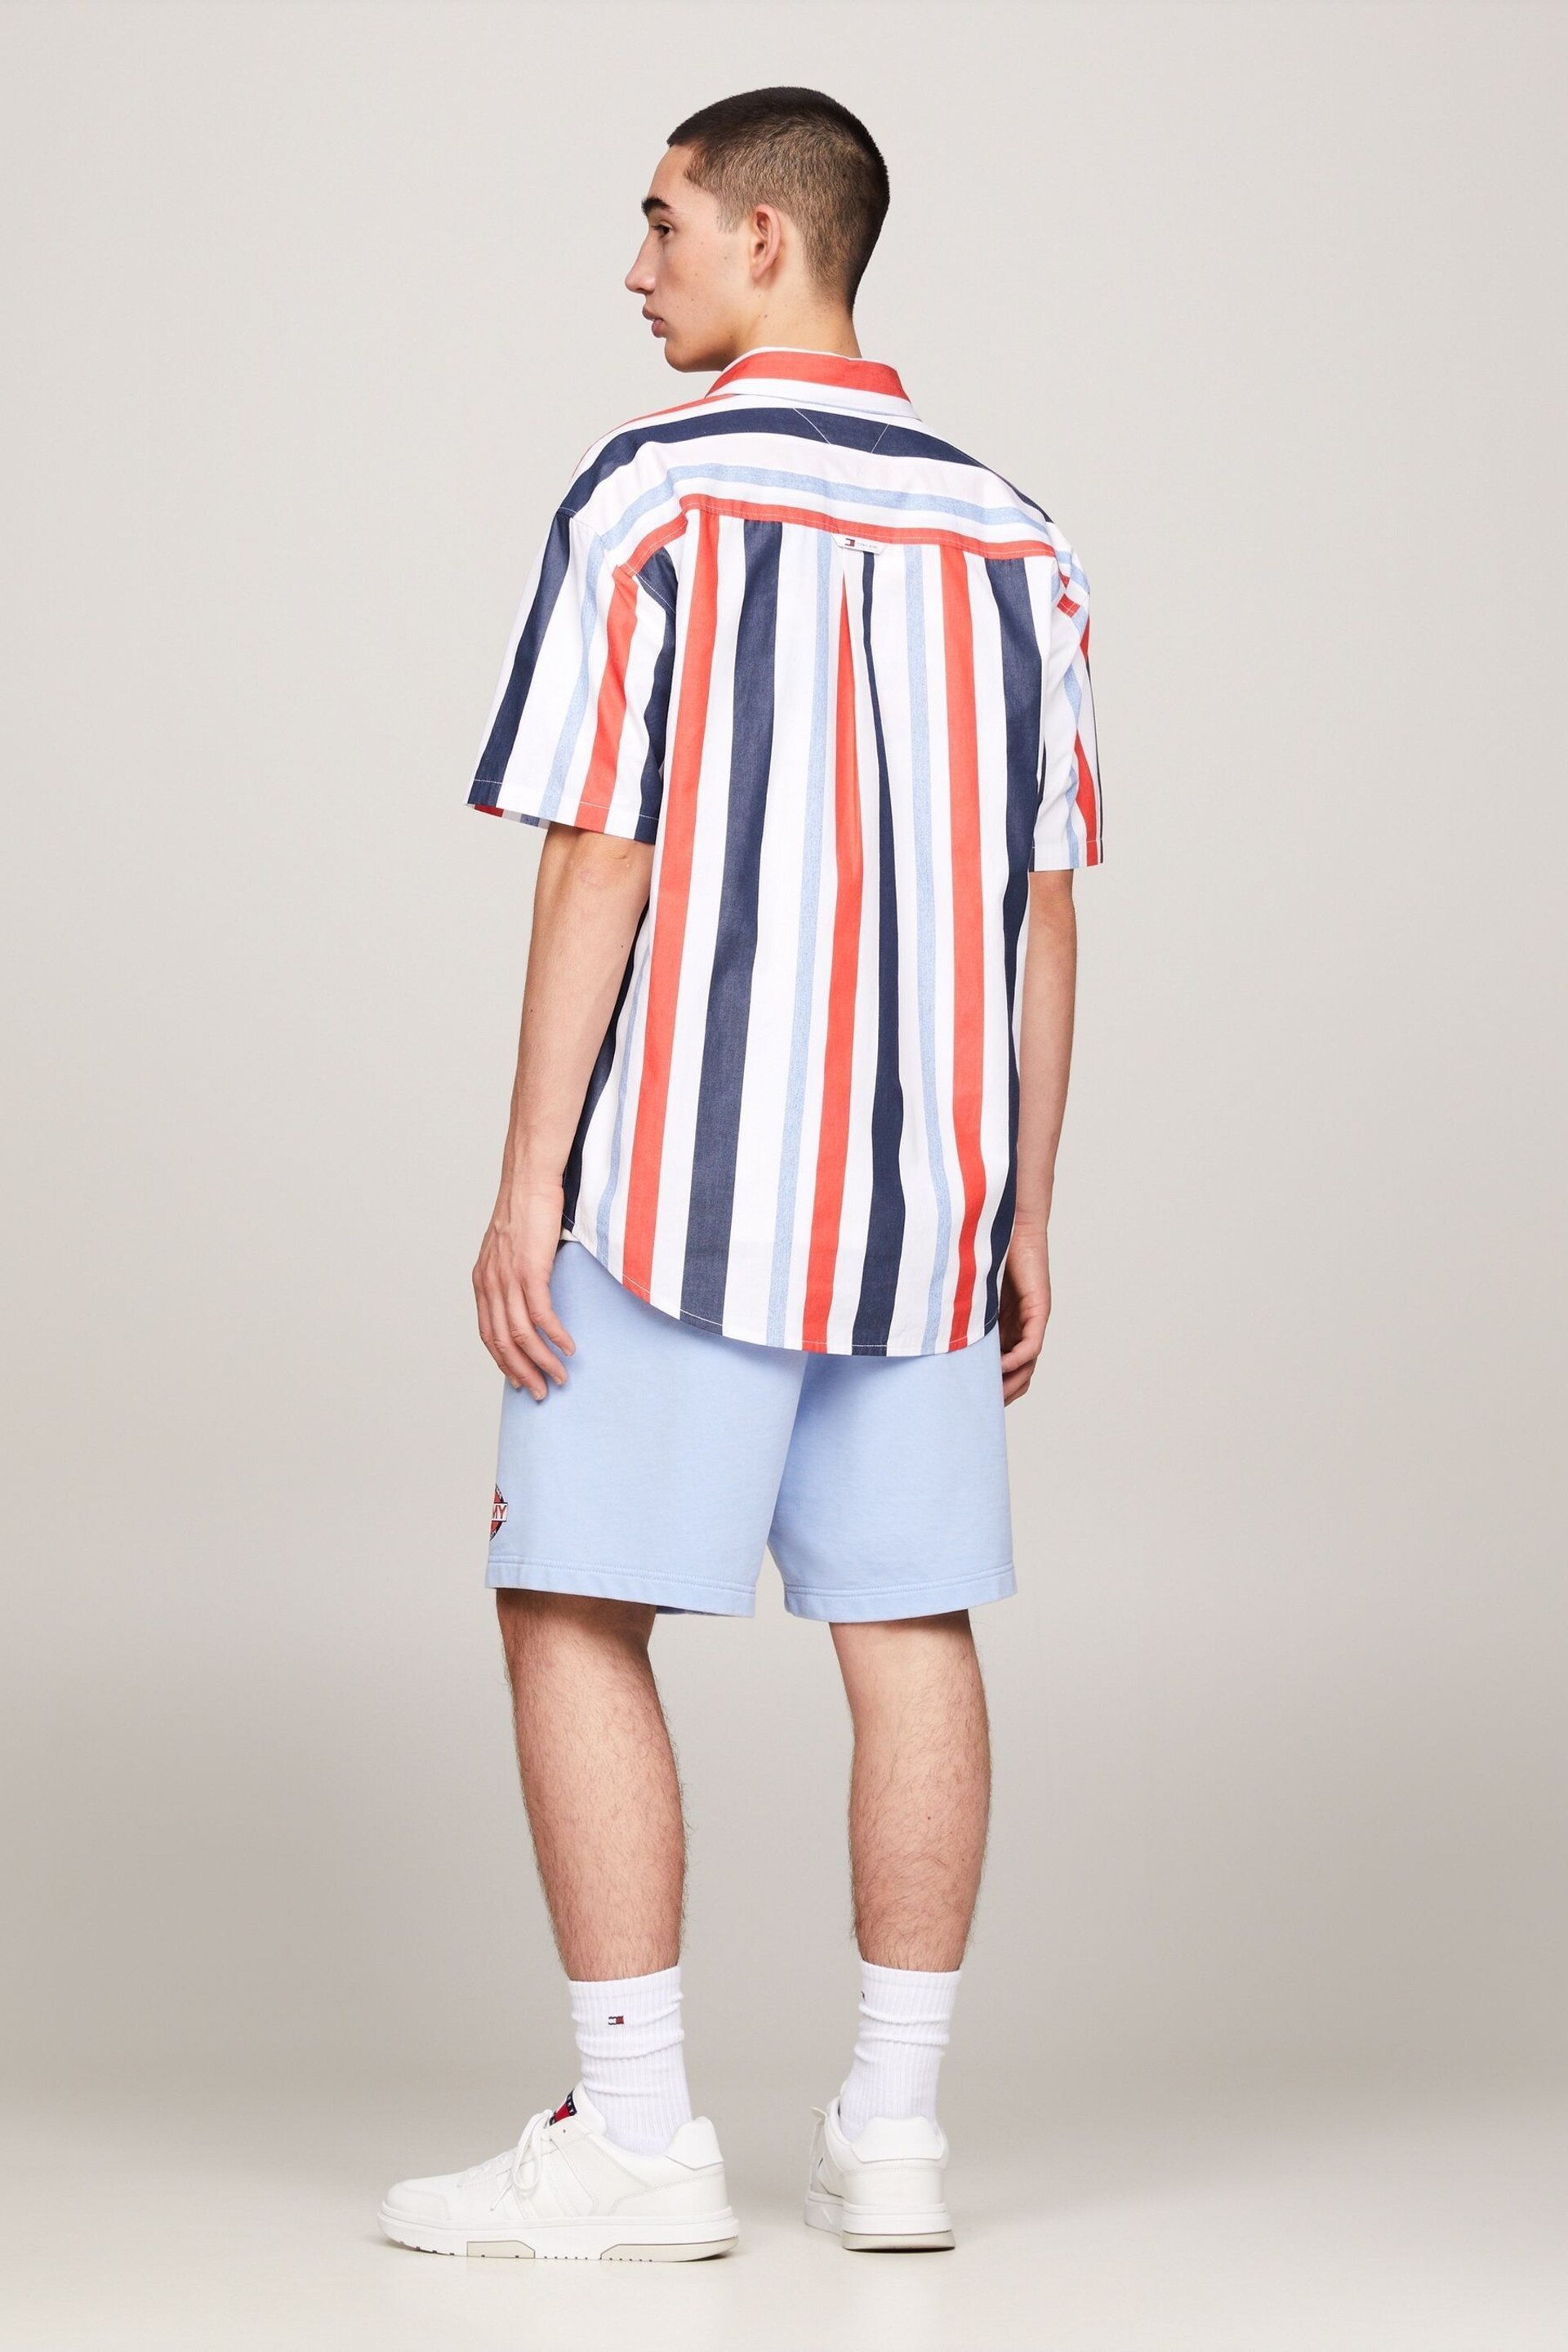 Tommy Jeans White Relaxed Stripe Shirt - Image 2 of 6